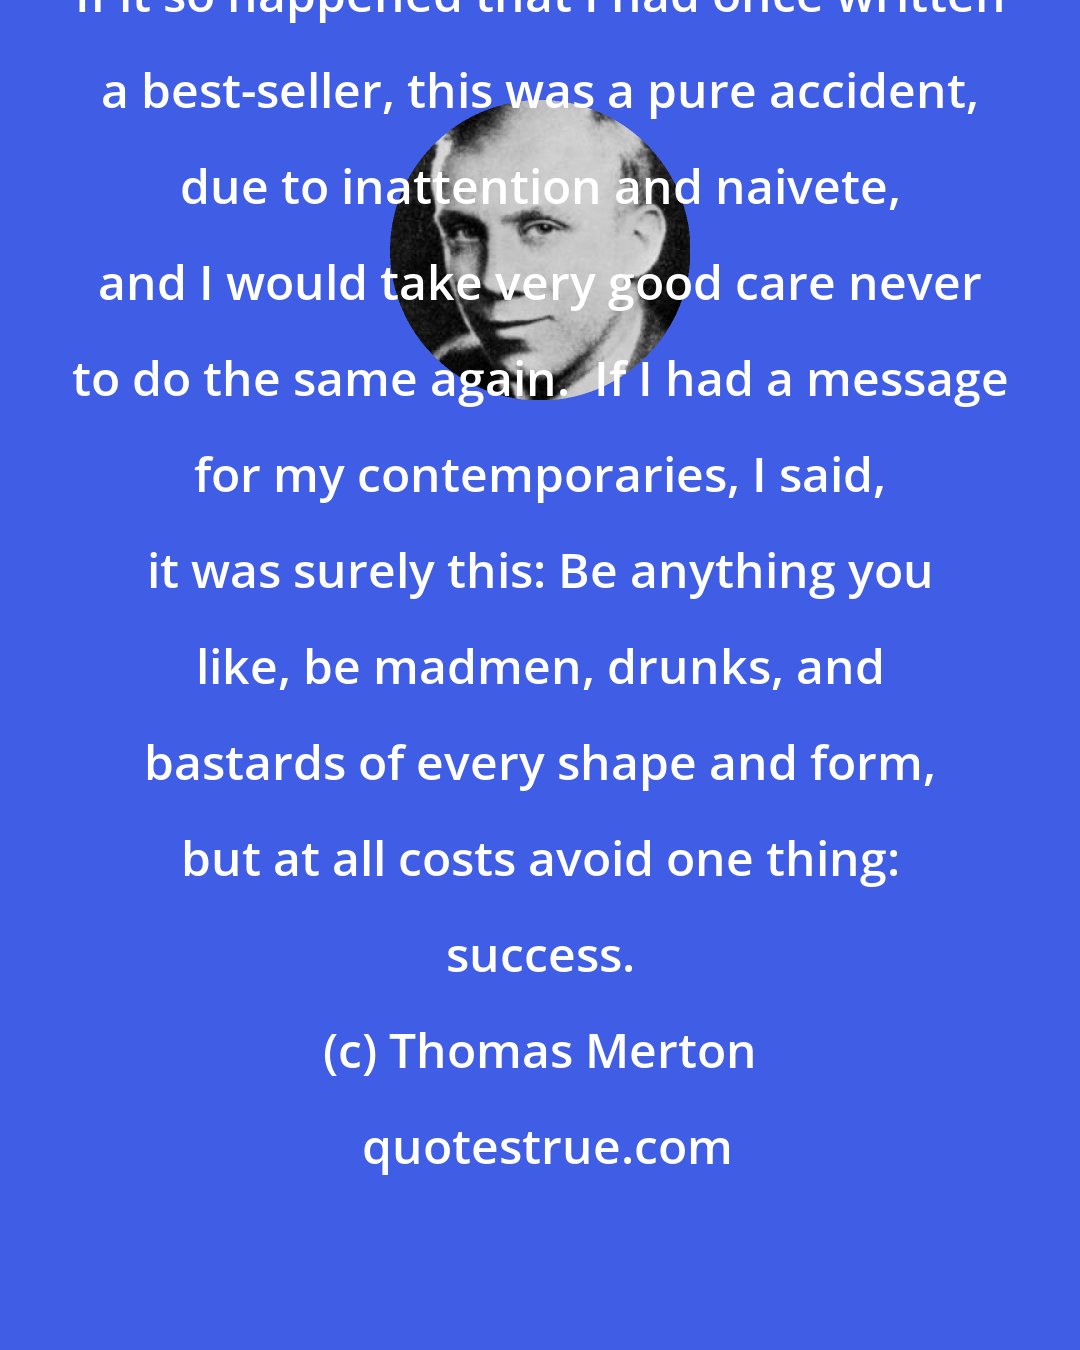 Thomas Merton: If it so happened that I had once written a best-seller, this was a pure accident, due to inattention and naivete, and I would take very good care never to do the same again.  If I had a message for my contemporaries, I said, it was surely this: Be anything you like, be madmen, drunks, and bastards of every shape and form, but at all costs avoid one thing: success.